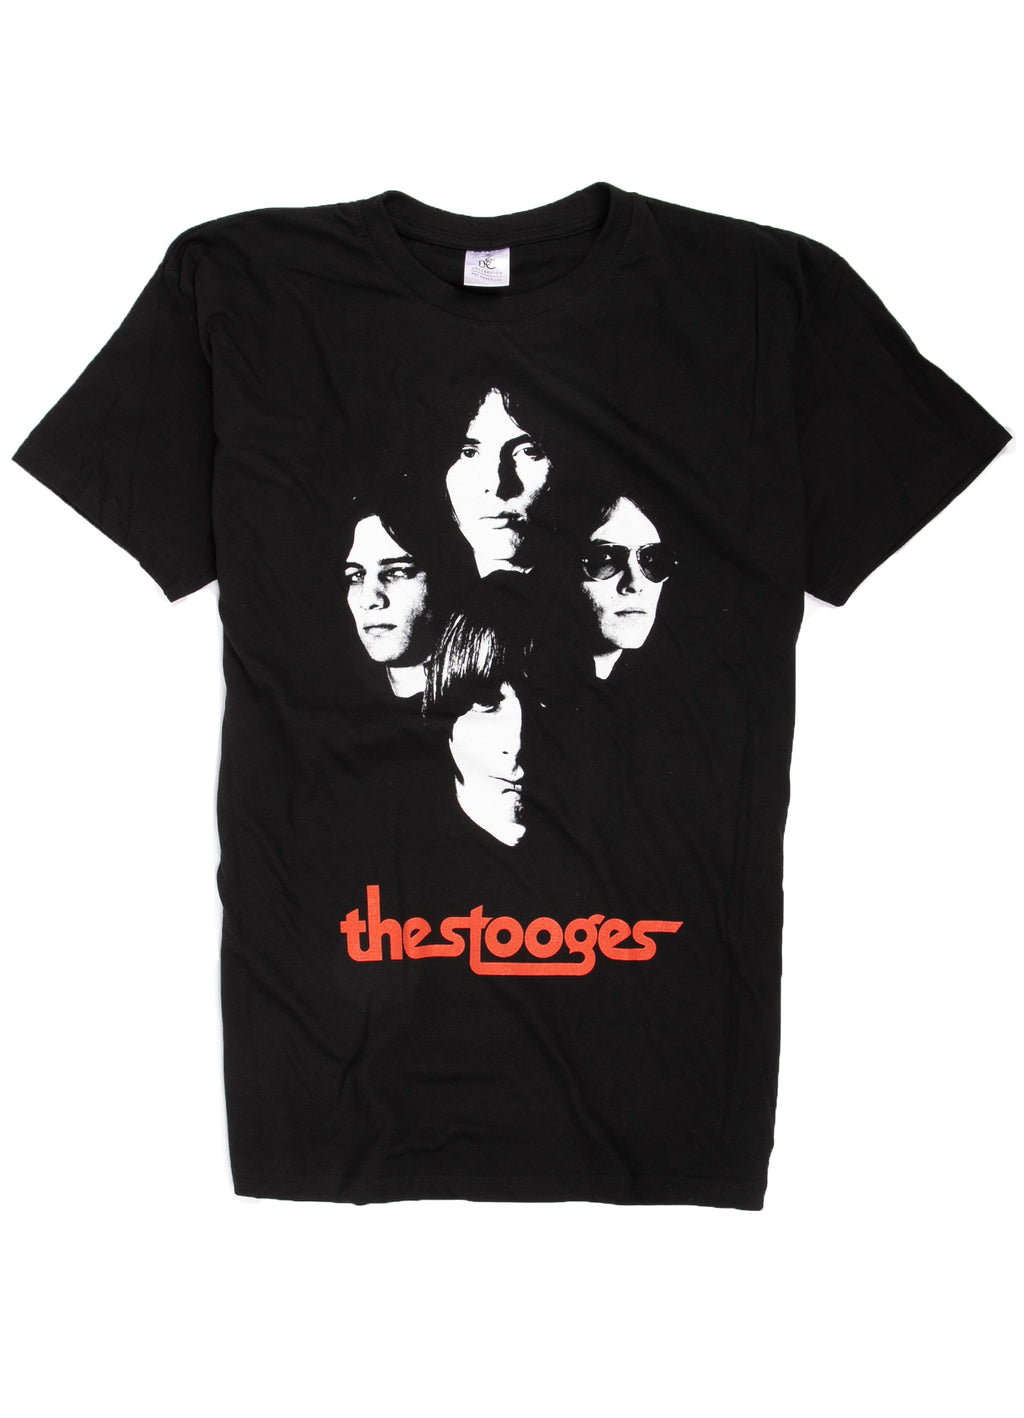 Iggy & The Stooges four faces t-shirt.